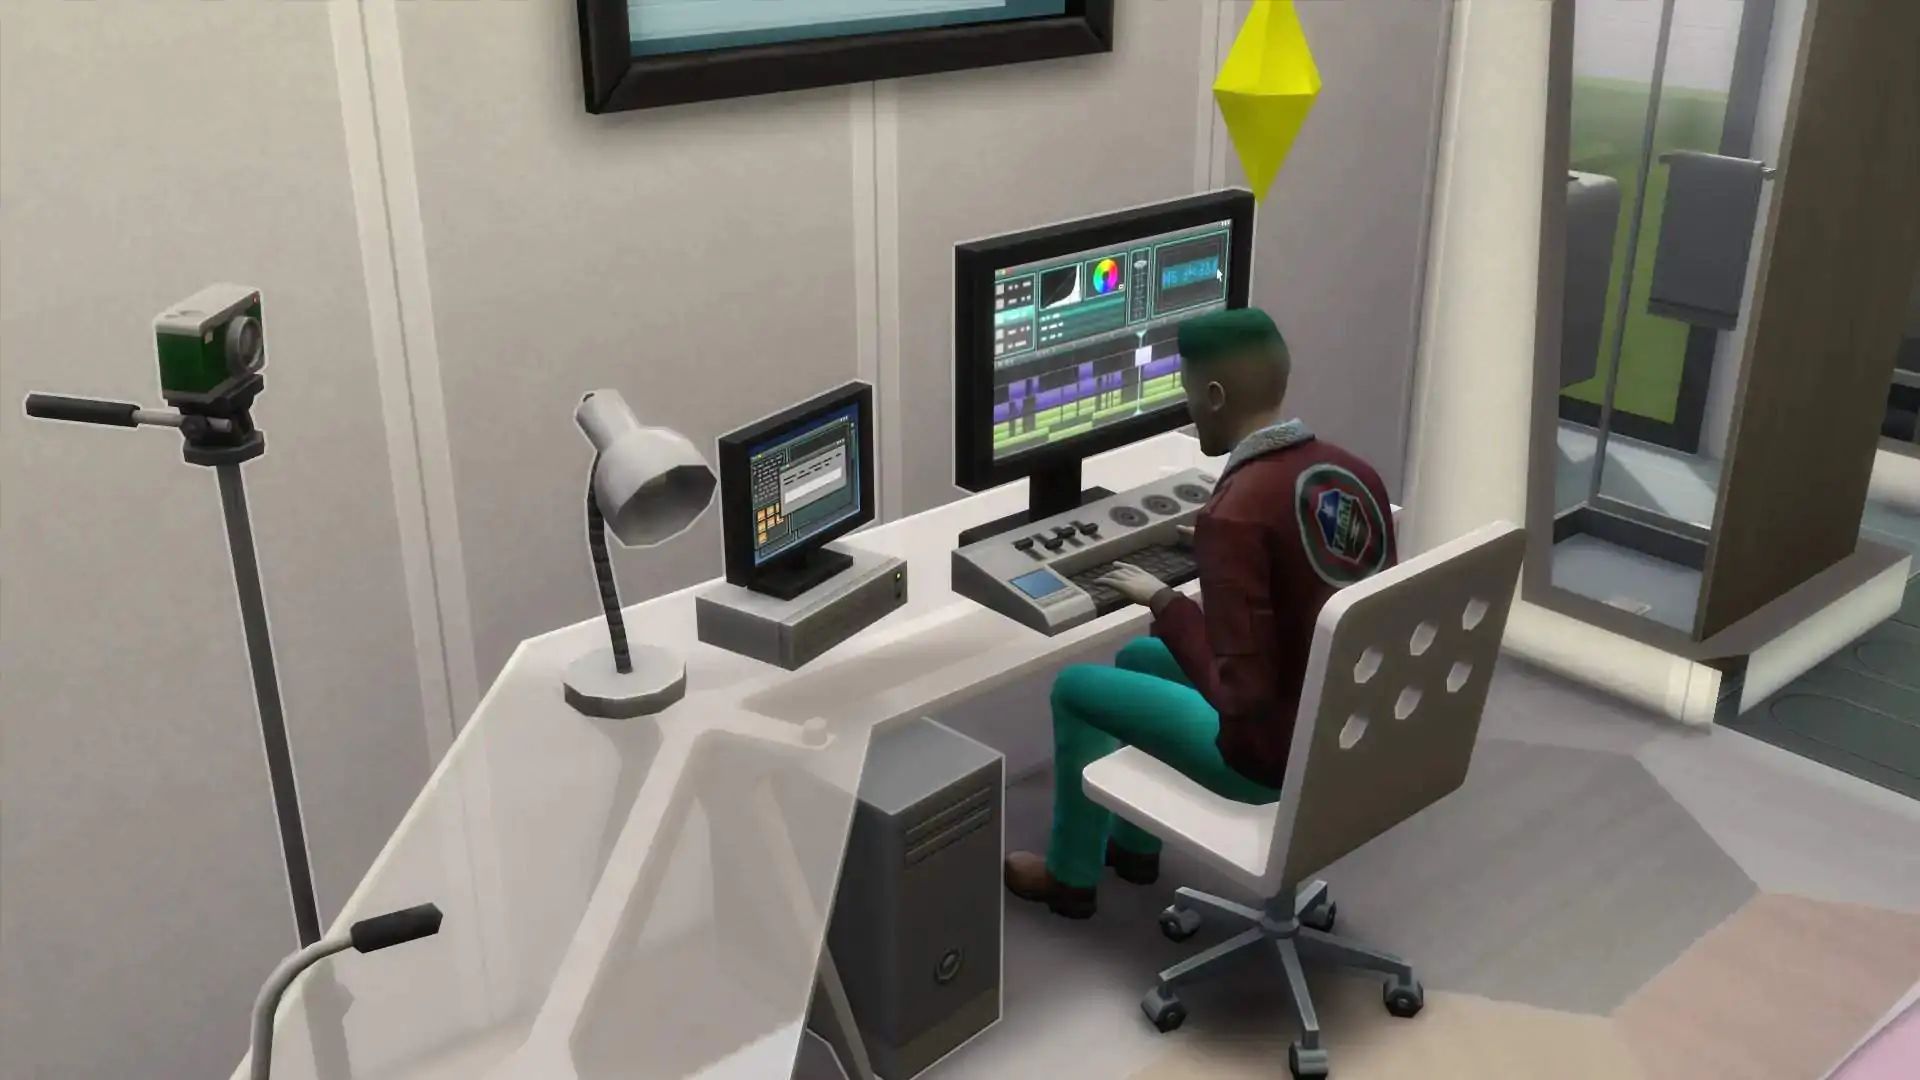 The Sims 4 Computer Specs